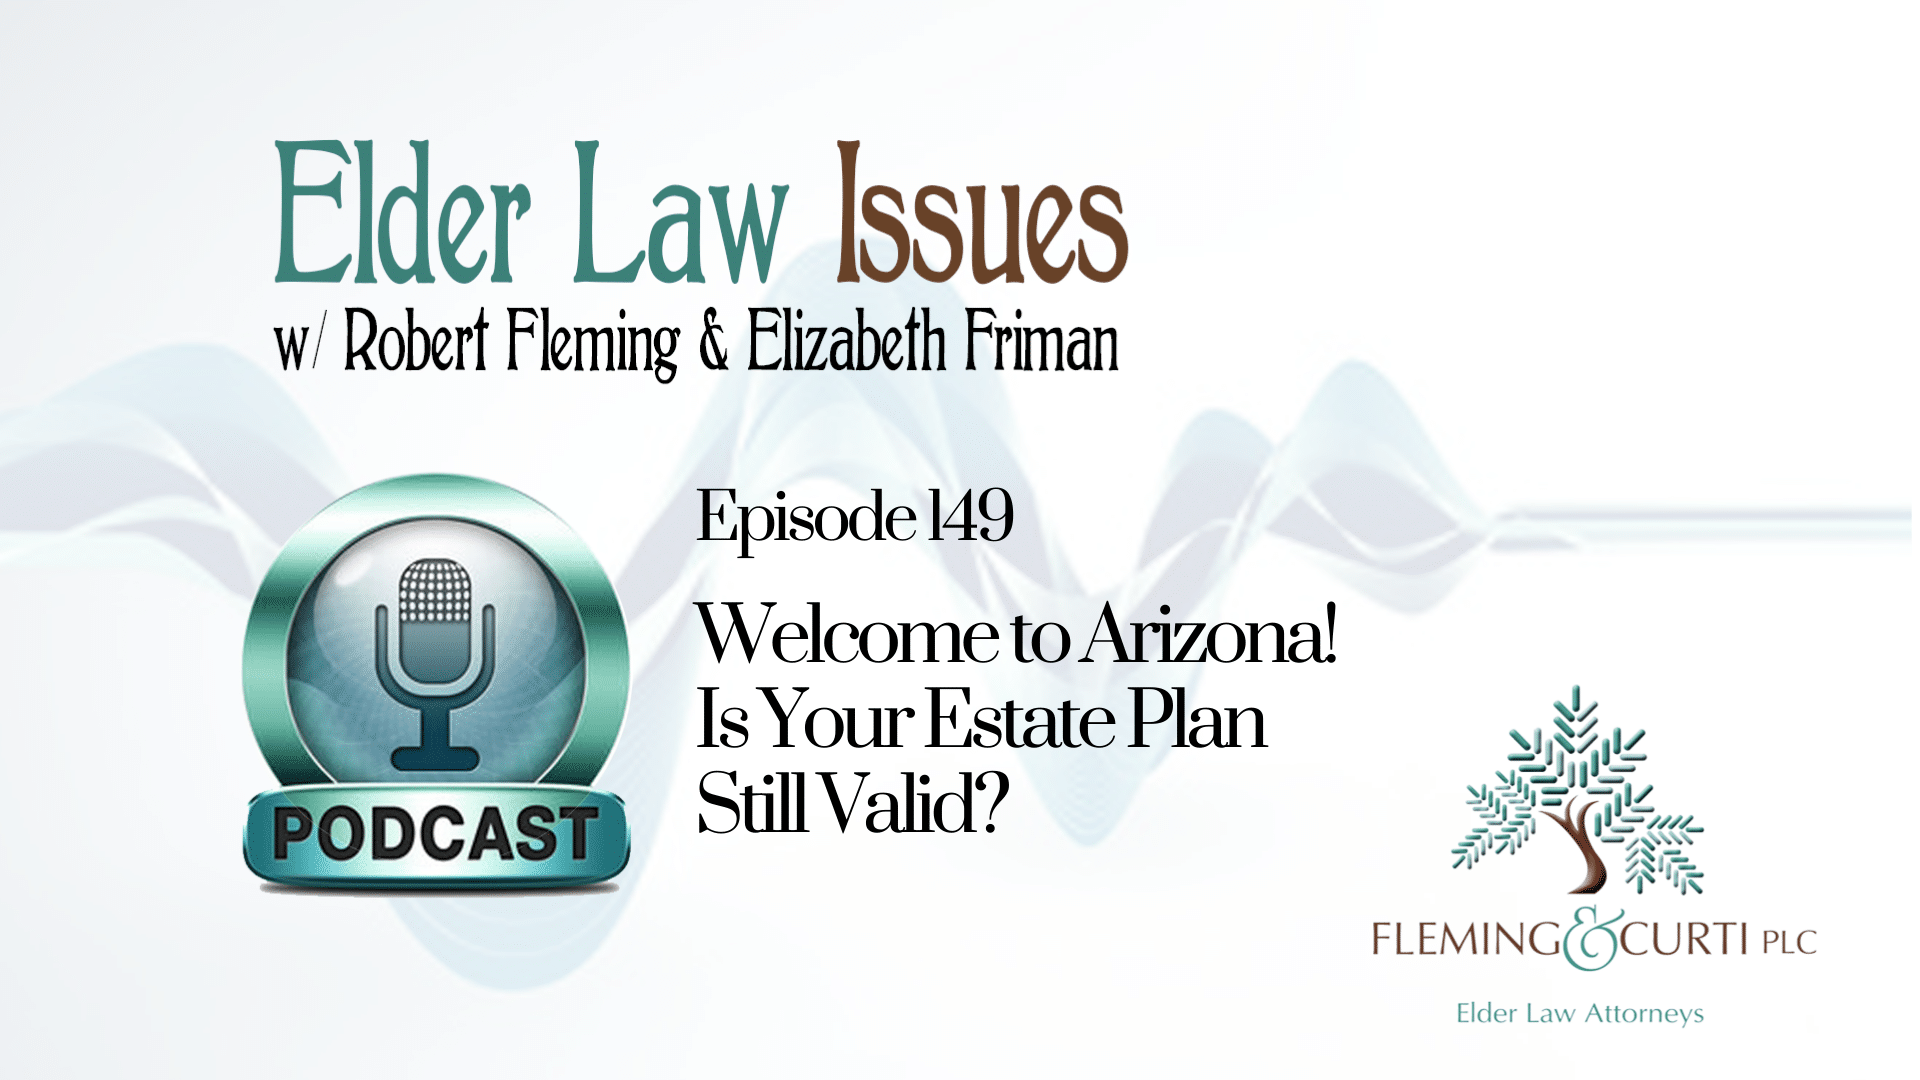 Welcome to Arizona! Is Your Estate Plan Still Valid?